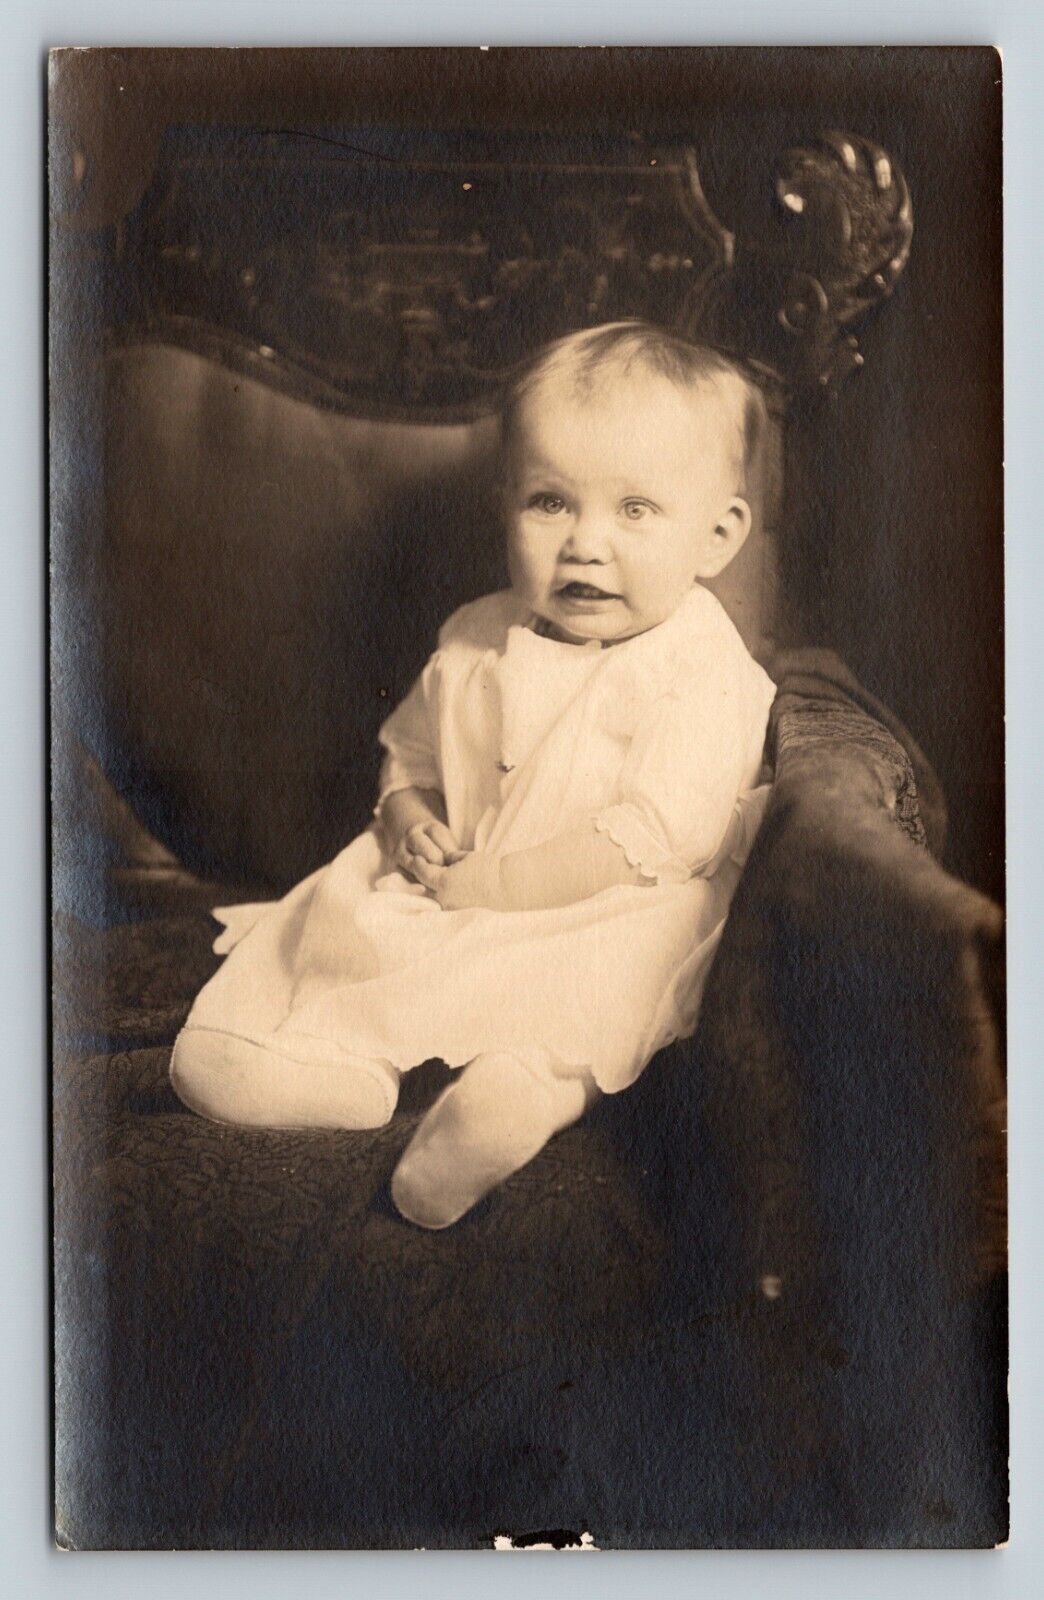 RPPC Adorable Baby Propped On Chair VINTAGE Postcard AZO 1926-1940s